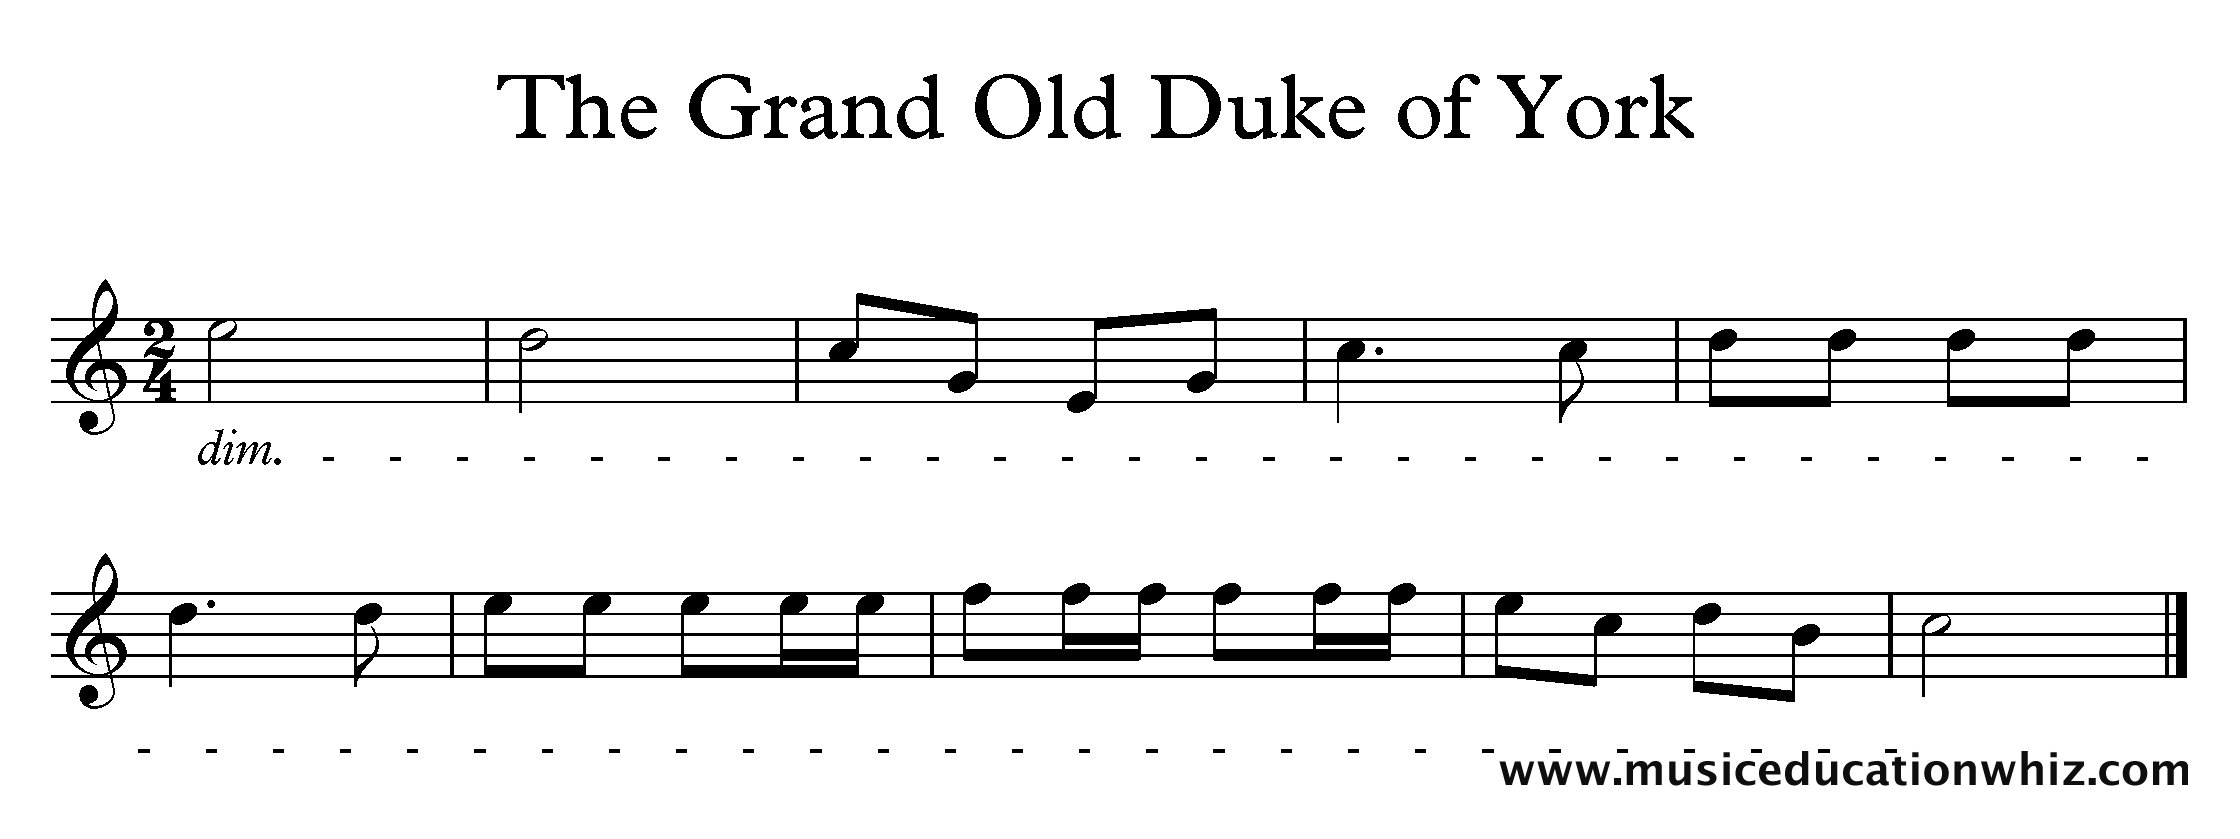 The Grand Old Duke of York melody with a dim. followed by a dashed line to the end.